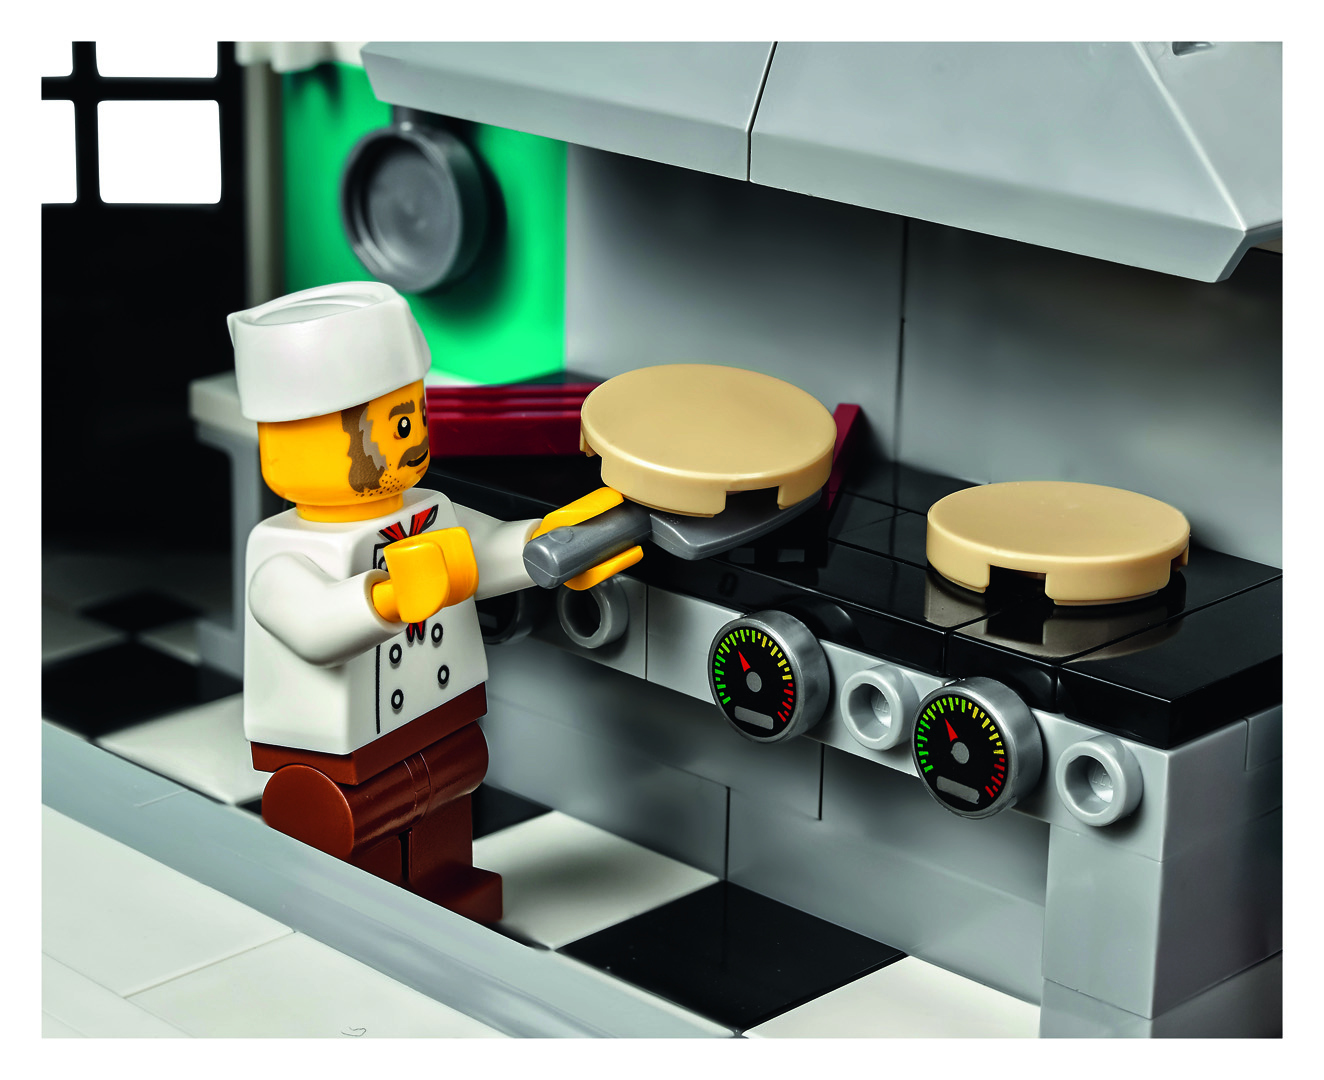 New Downtown Diner Set Brings ’50s Flair To LEGO Cities